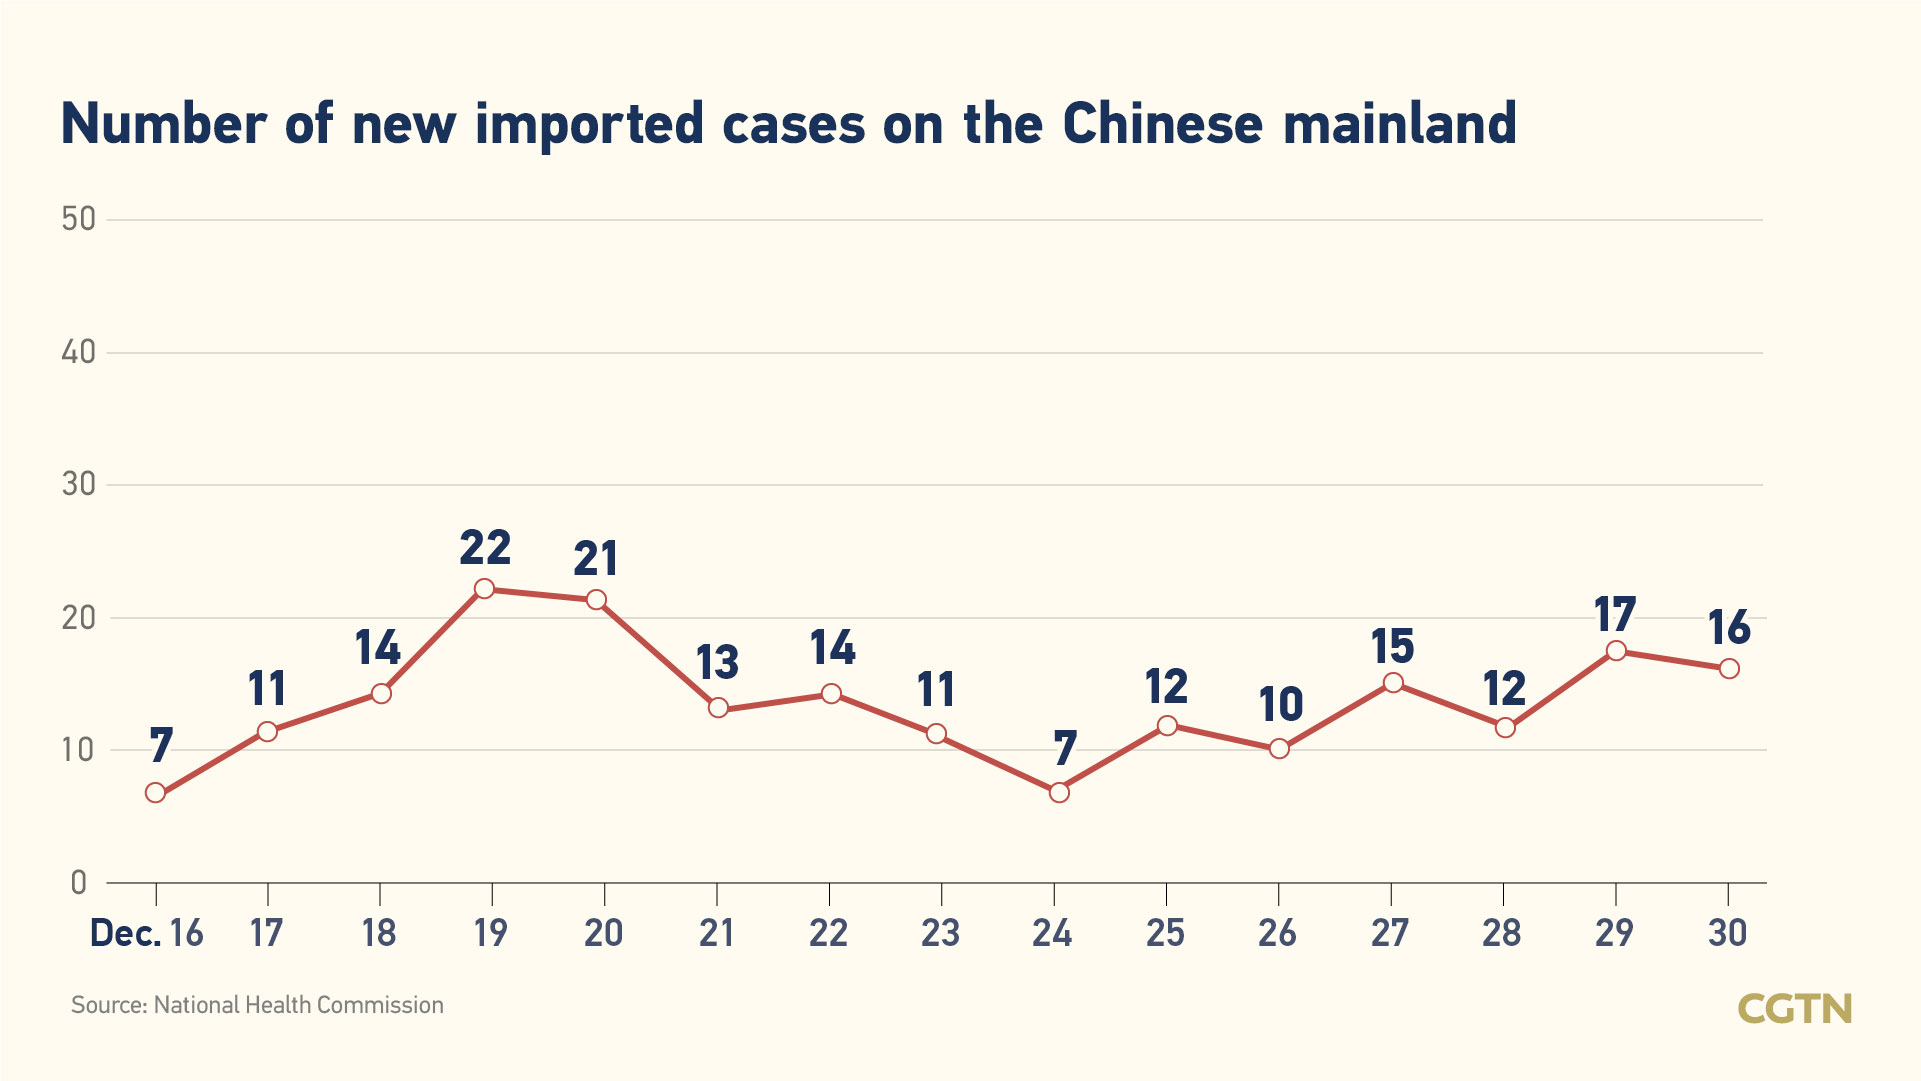 Chinese mainland reports 25 new COVID-19 cases